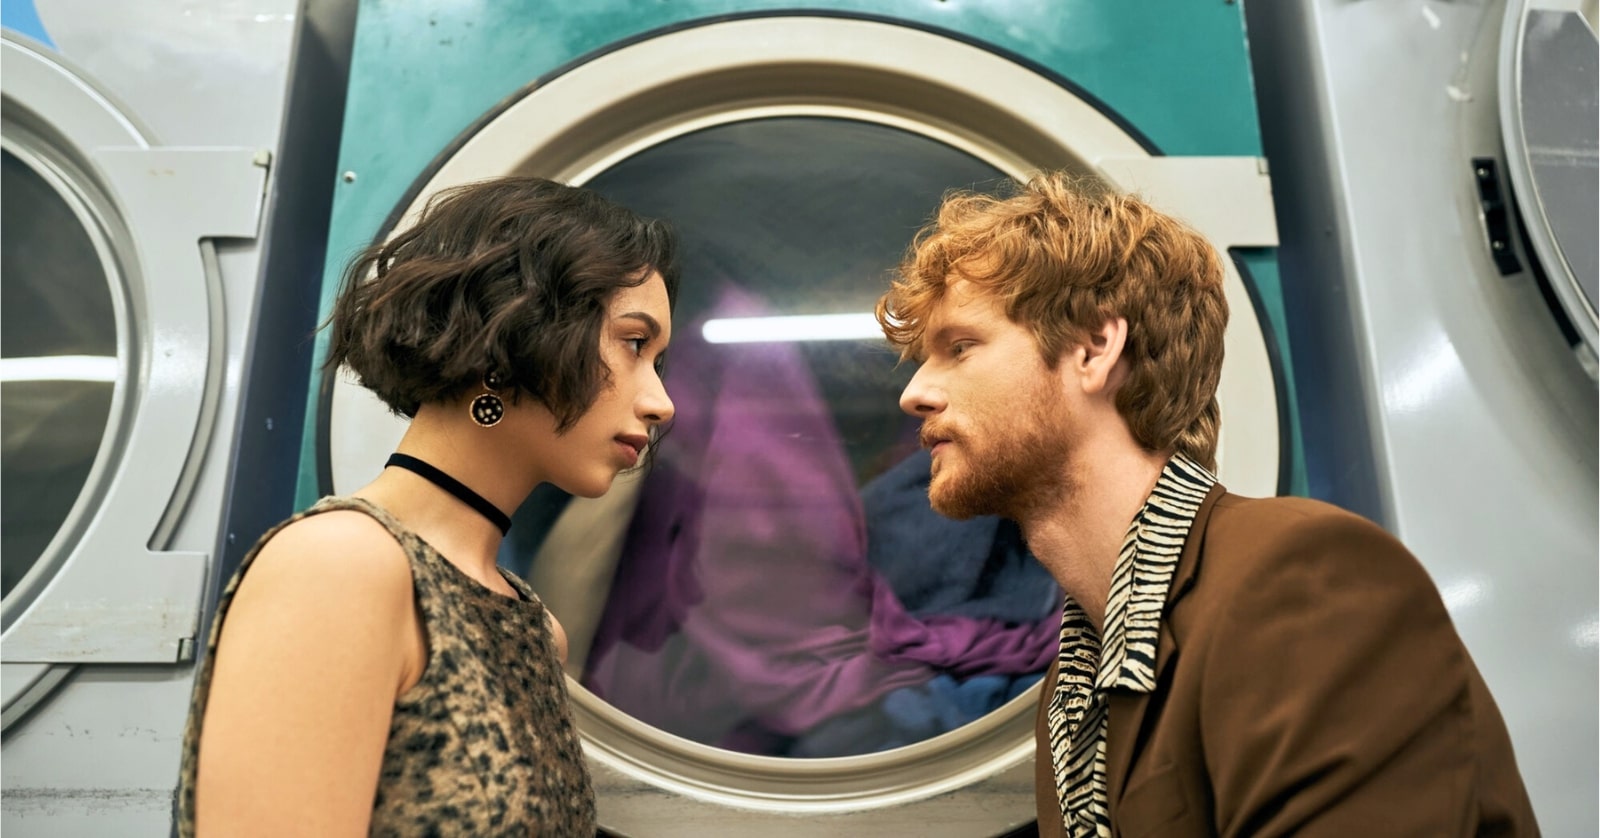 young man and young woman looking into each other's eyes in a laundromat setting with a large washing machine in the background